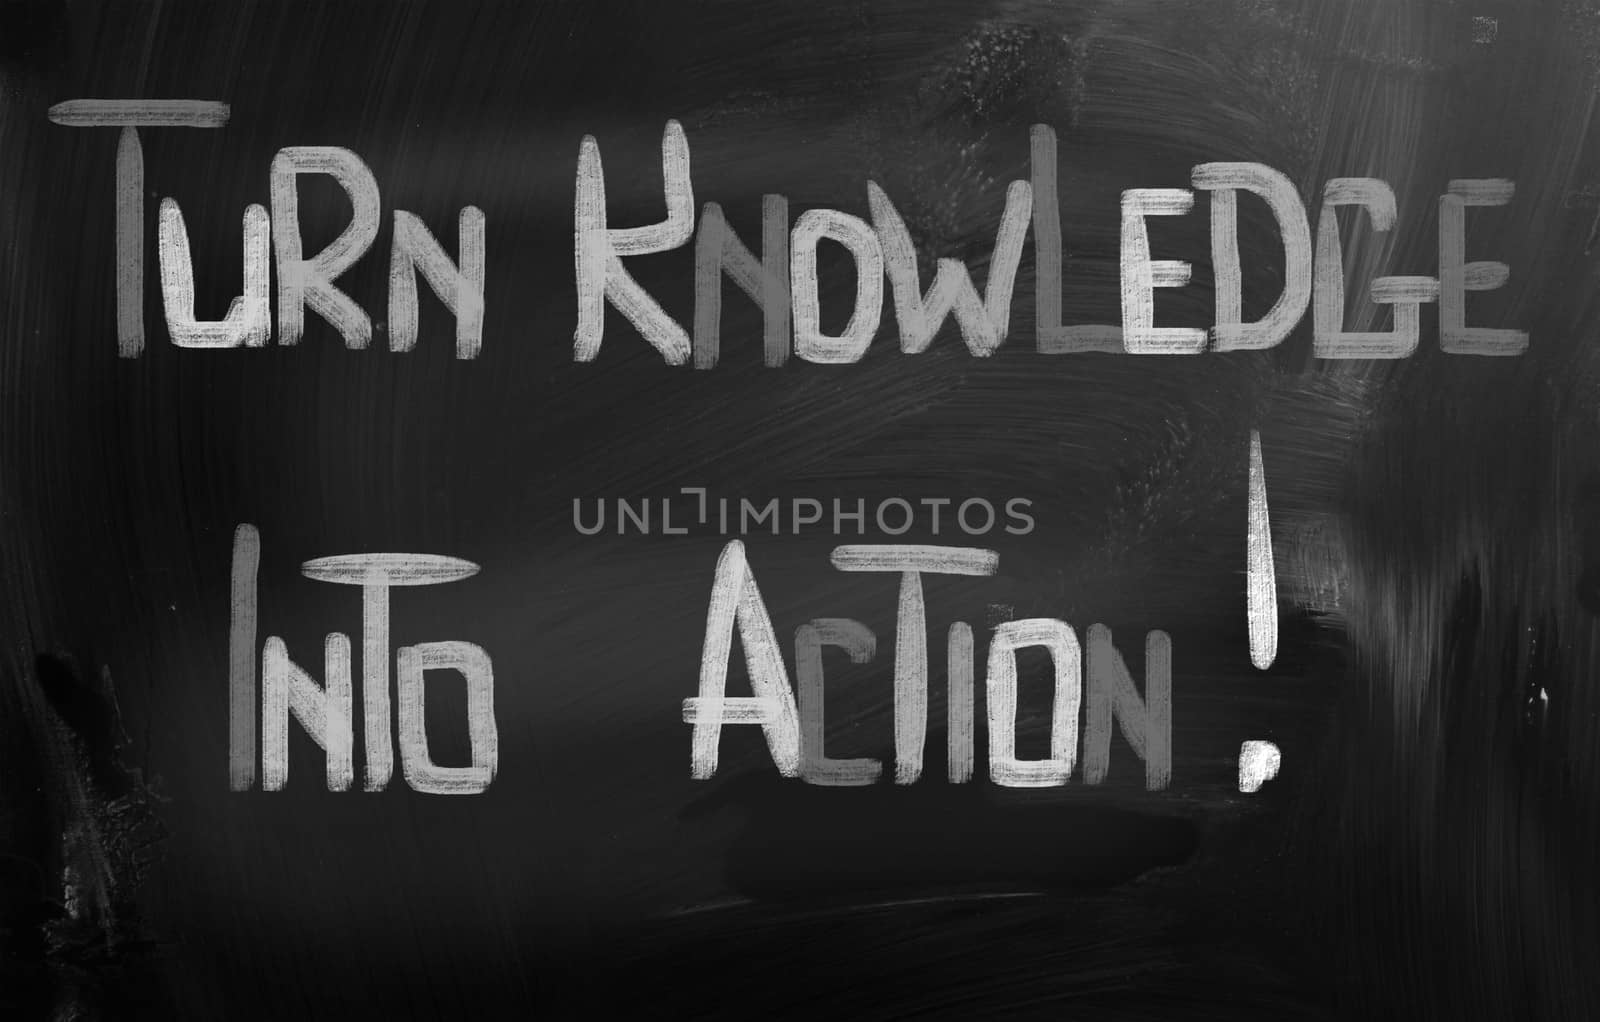 Turn Knowledge Into Action Concept